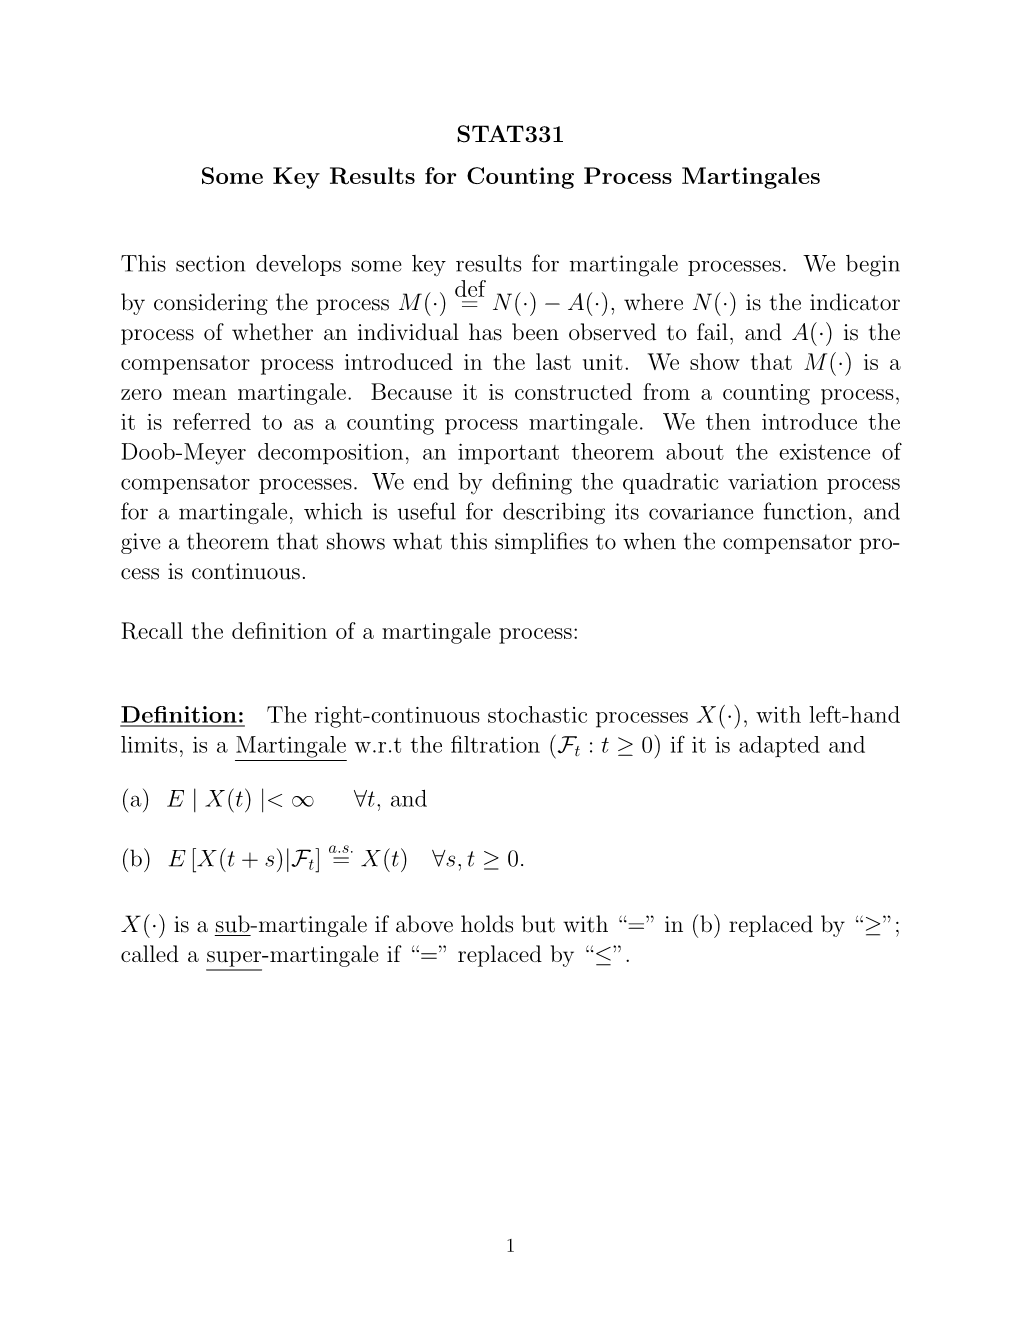 STAT331 Some Key Results for Counting Process Martingales This Section Develops Some Key Results for Martingale Processes. We Be